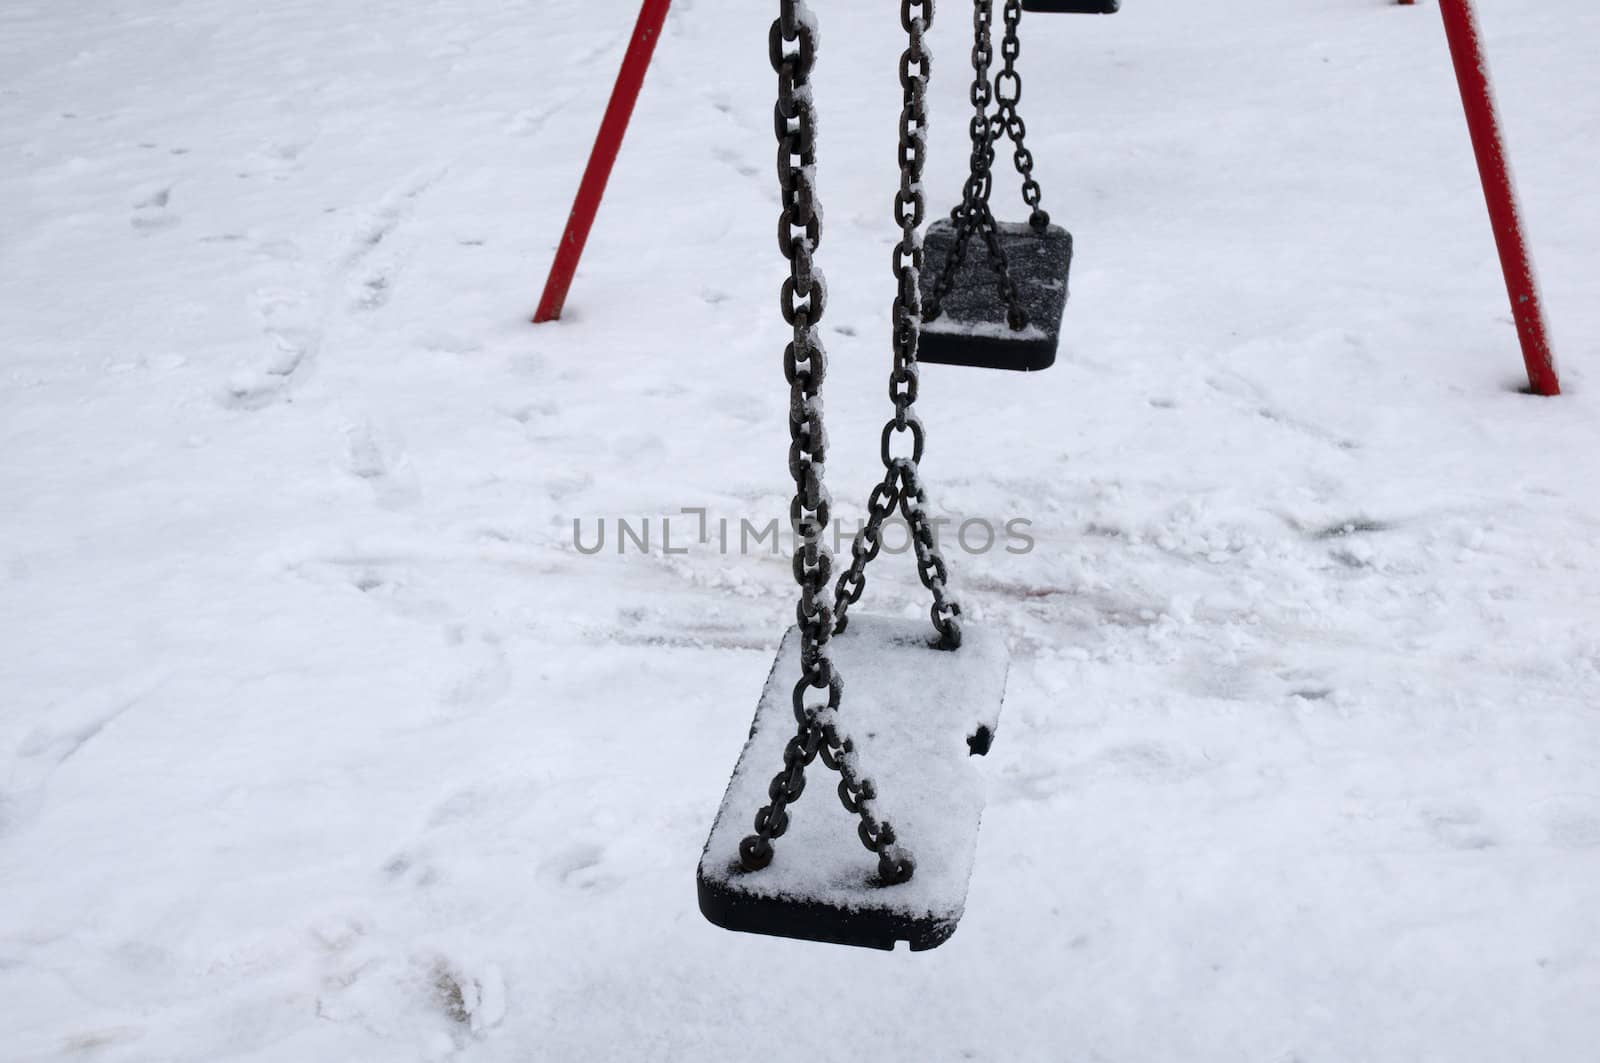 The seat of a swings covered in snow